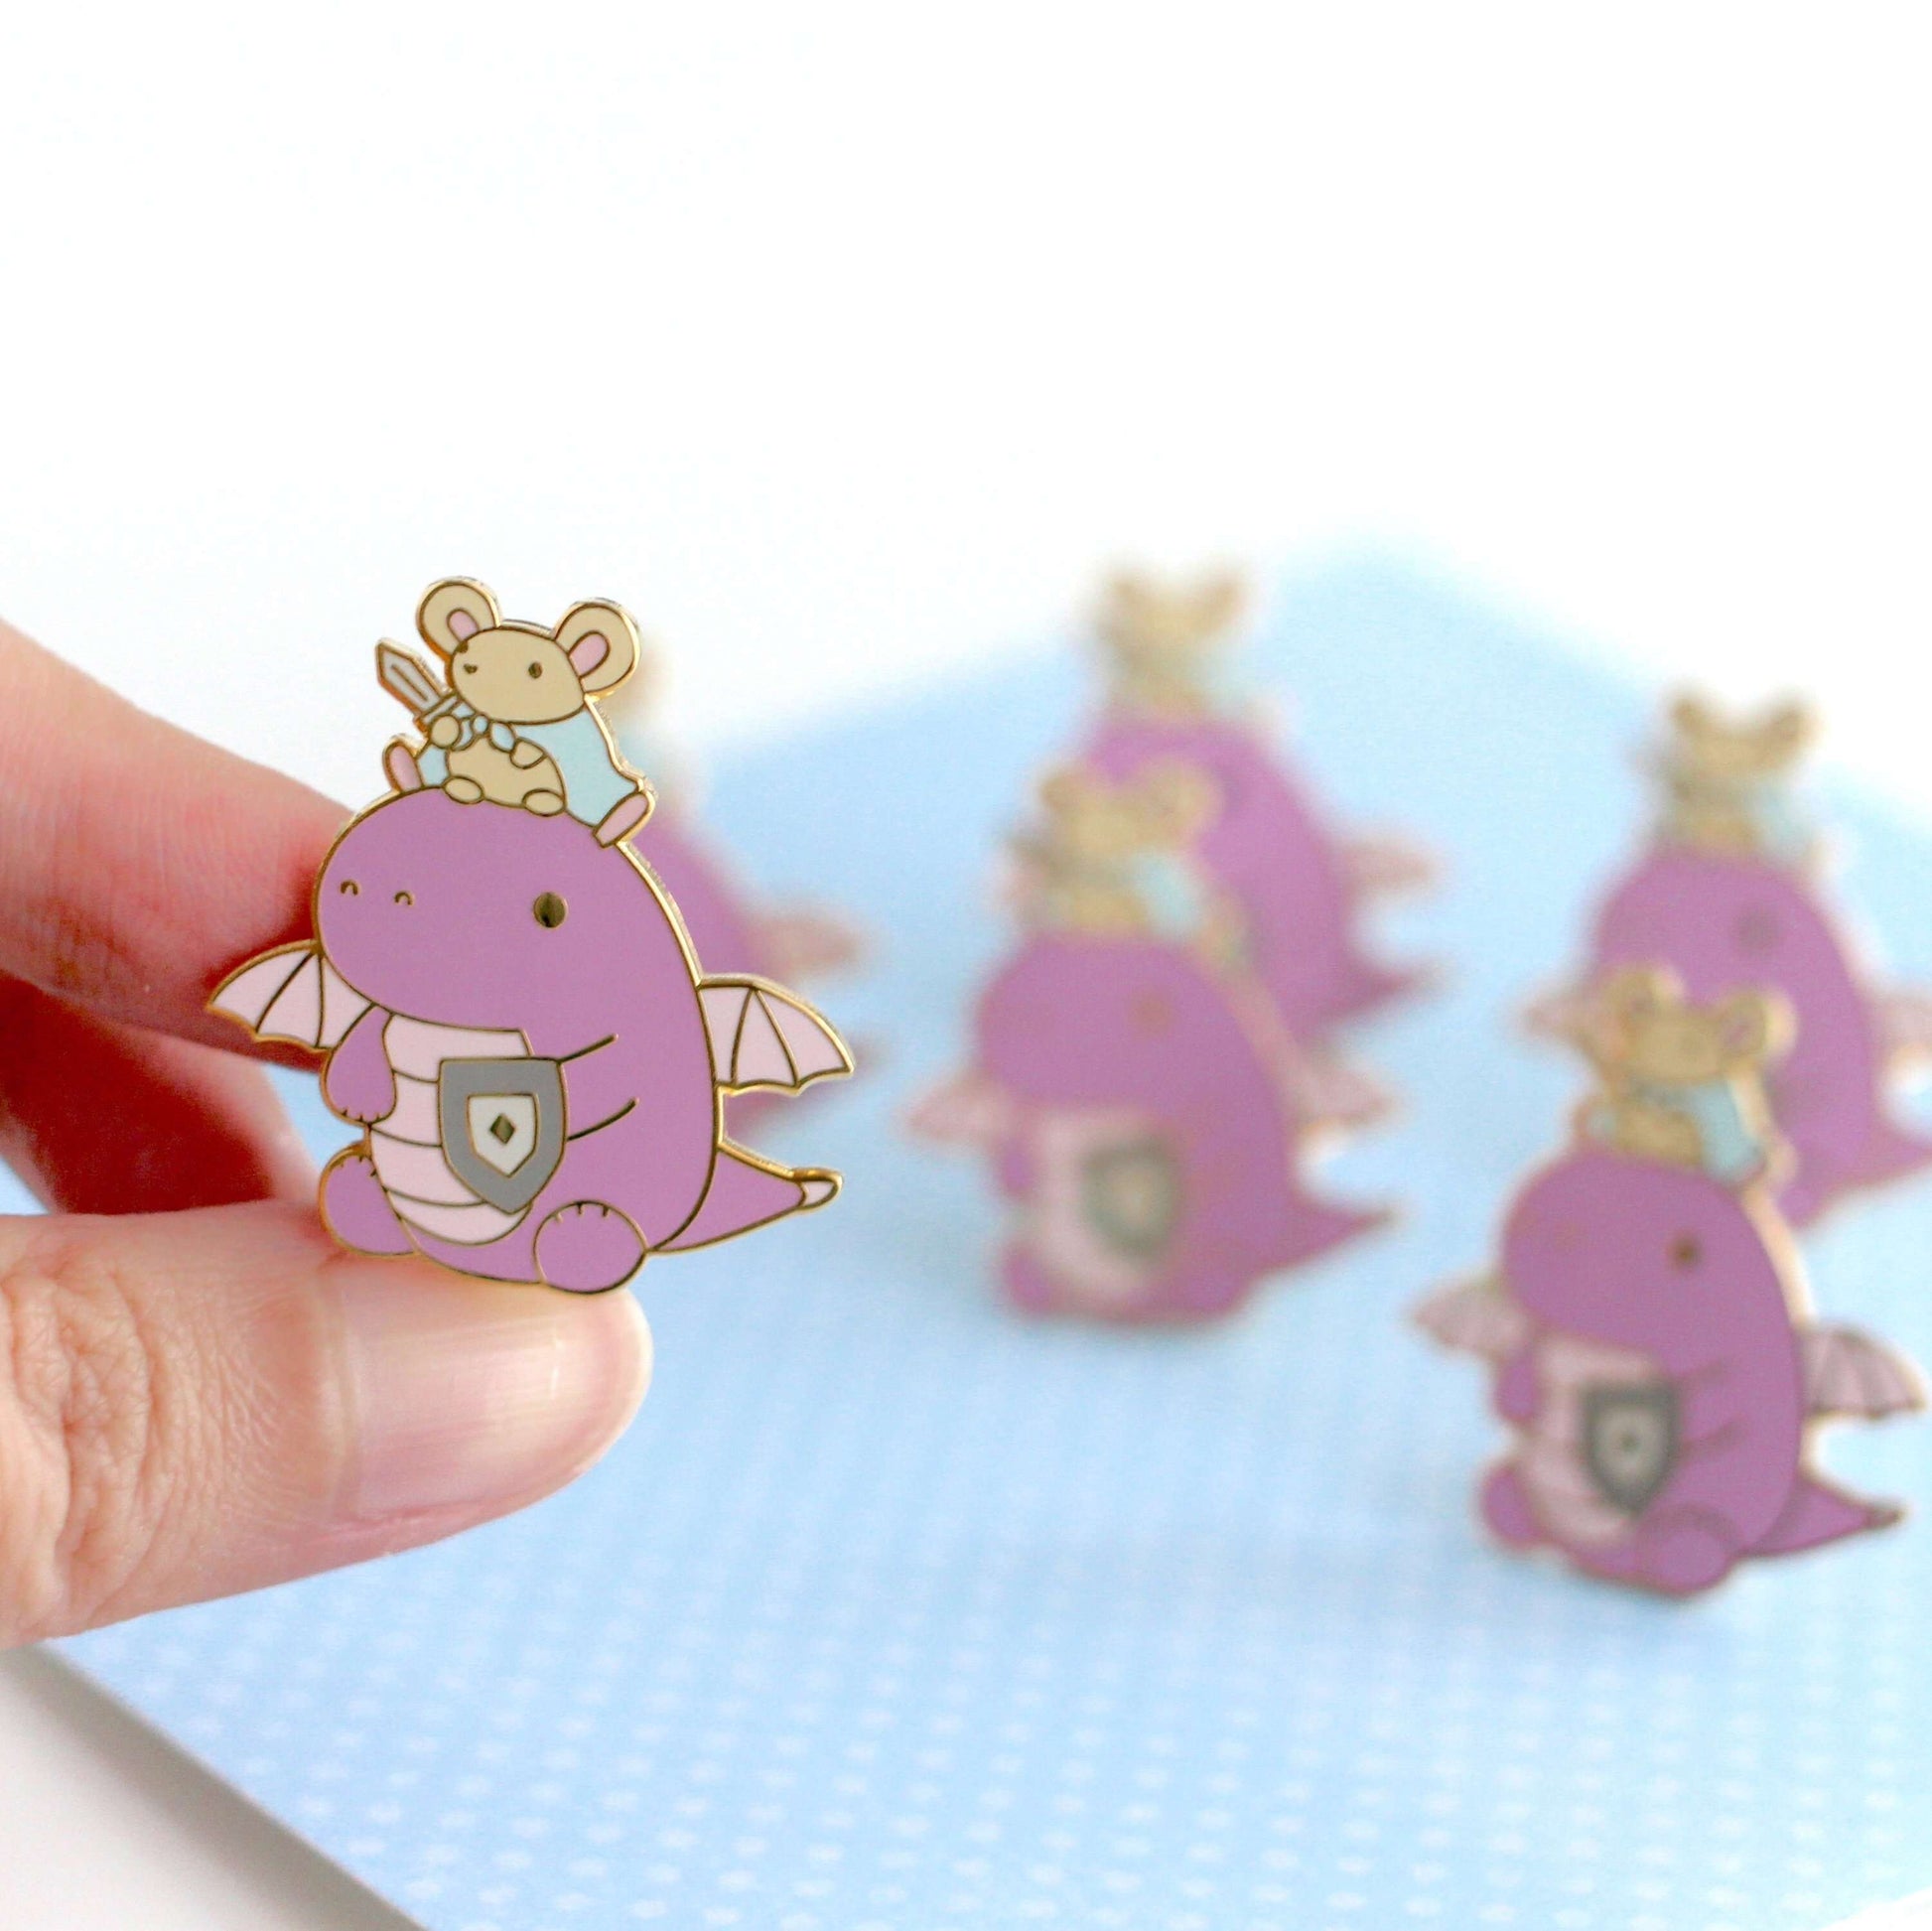 Mouse and Dragon Knight Enamel Pin (Light Purple Dragon Variant) - Dragon Gift - Cute Mouse Pin by Wild Whimsy Woolies